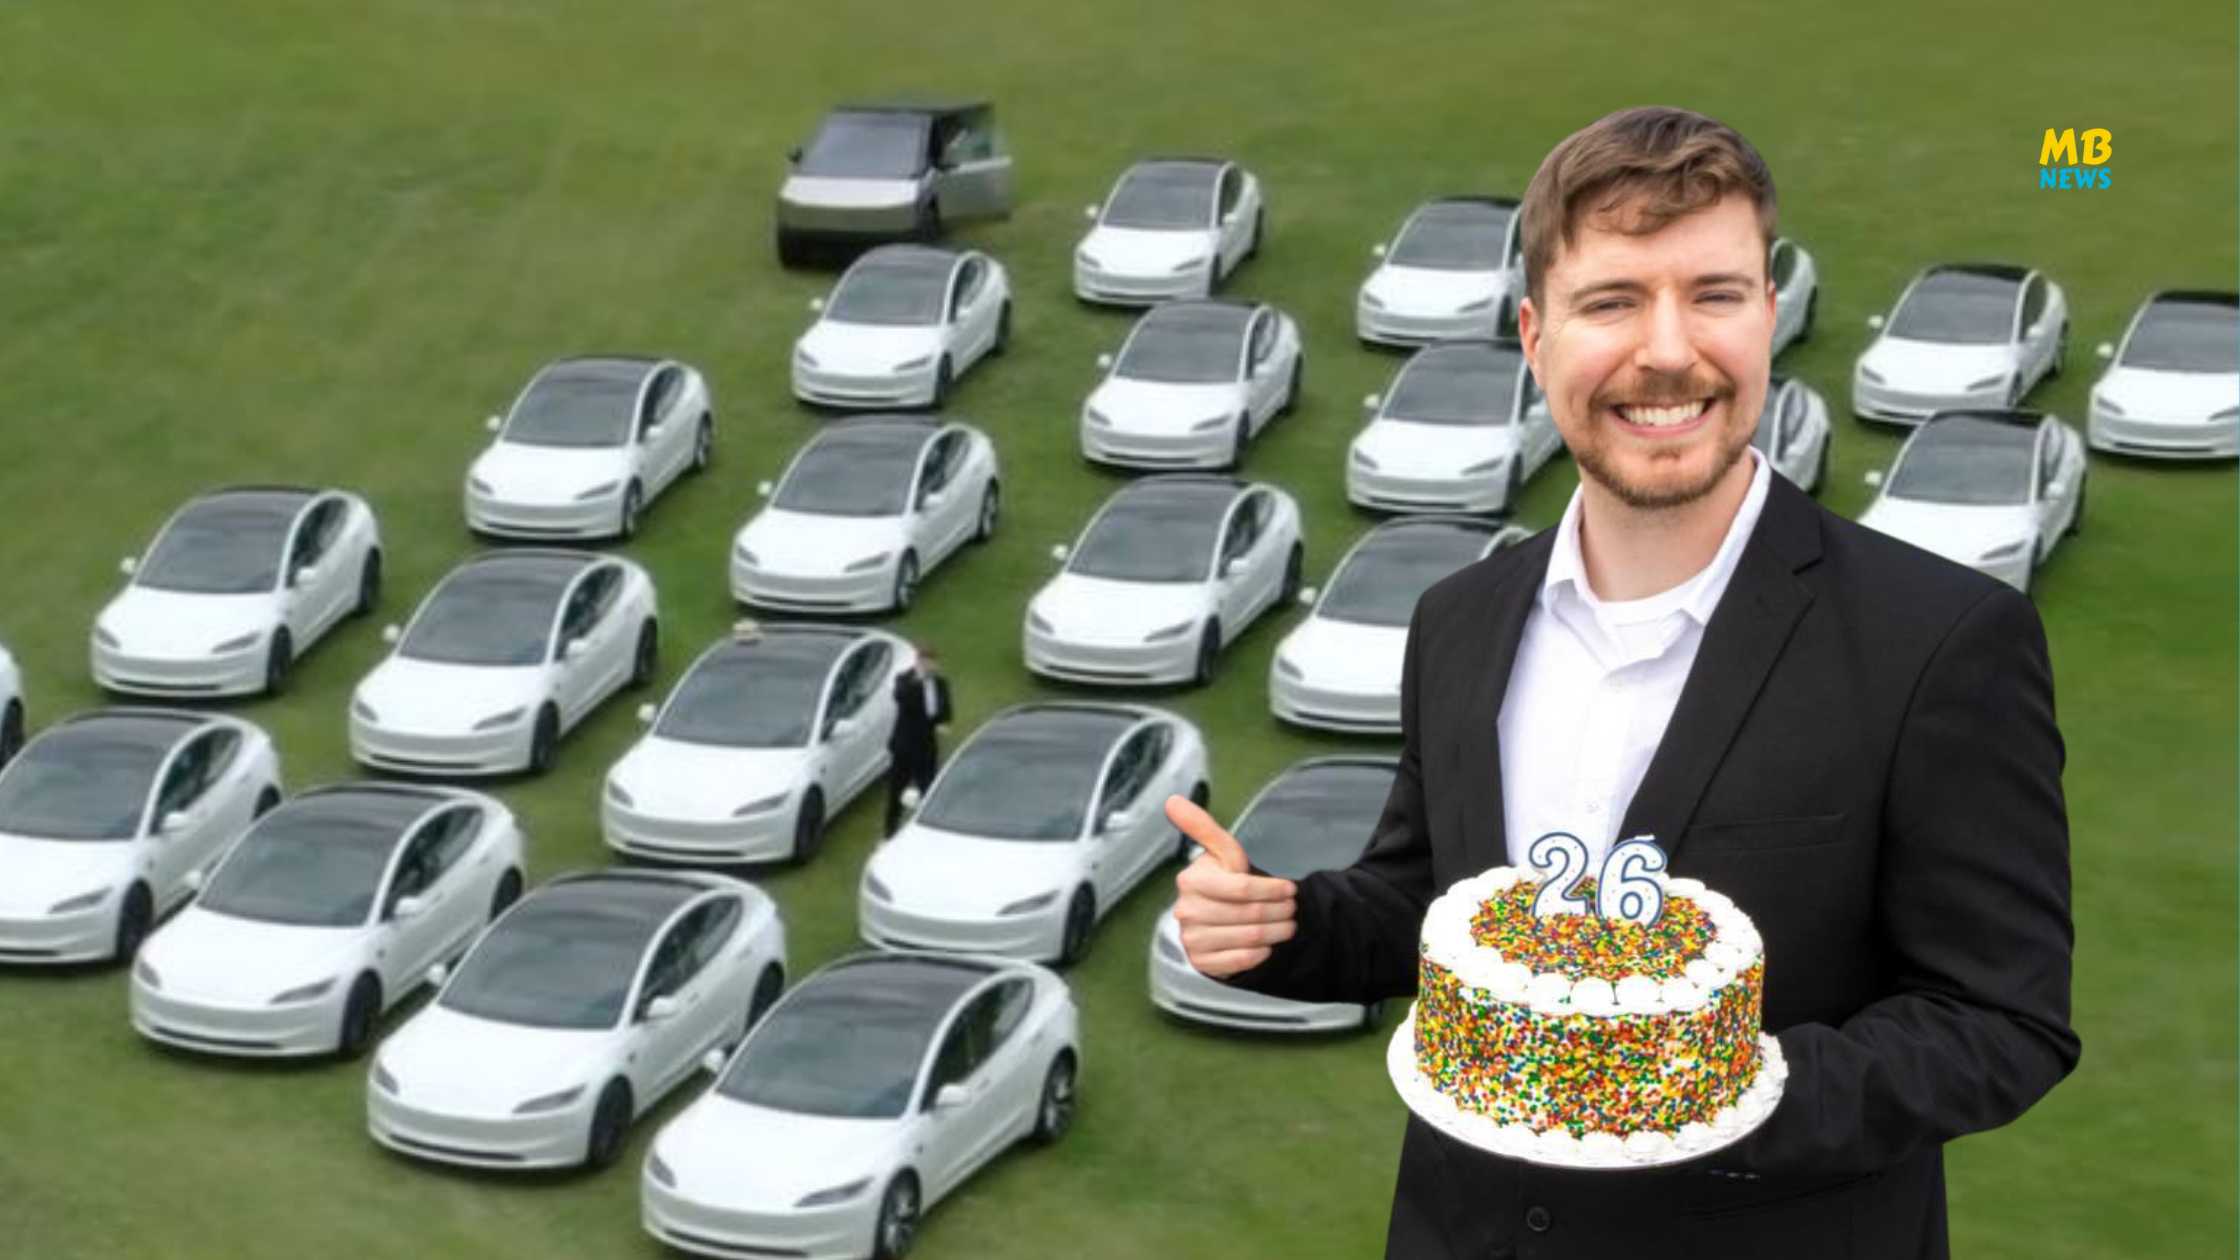 Tesla Madness: Insider Tips for MrBeast's 26-Car Birthday, How to Enter and Win in MrBeast's Epic Giveaway!